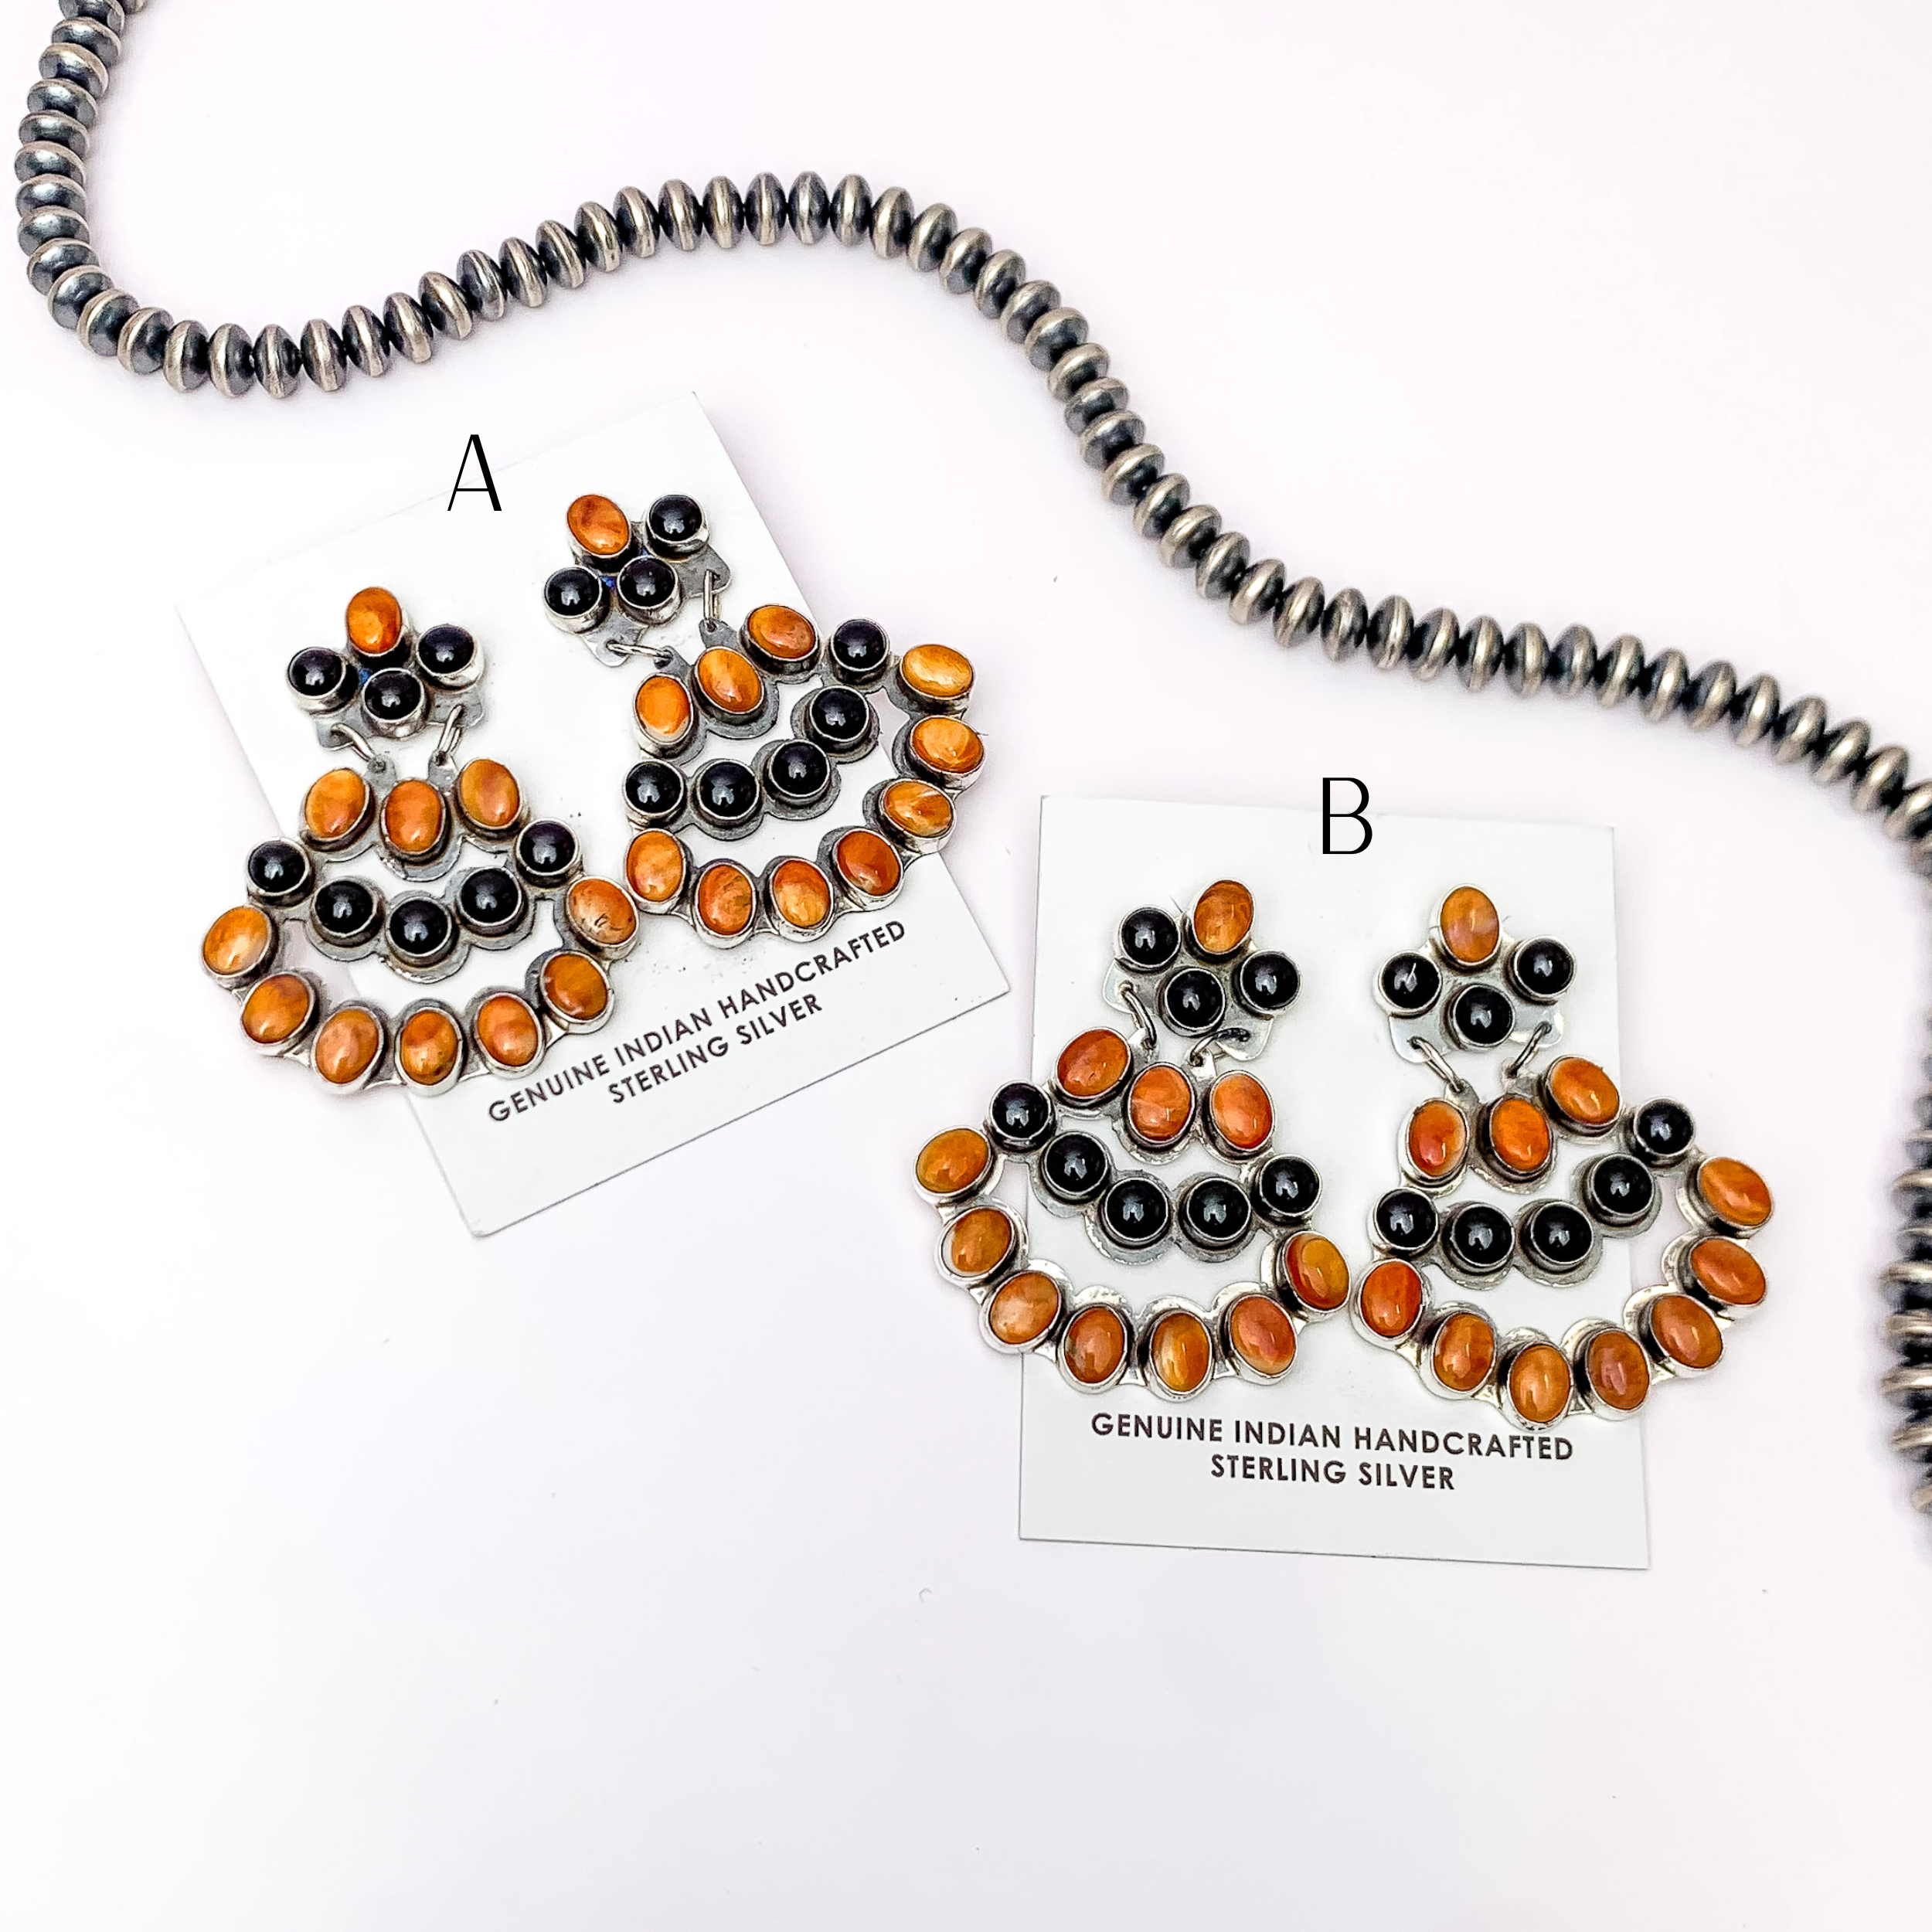 JB | Navajo Handmade Sterling Silver Post Earrings with Orange Spiny Oyster and Black Onyx Stones - Giddy Up Glamour Boutique